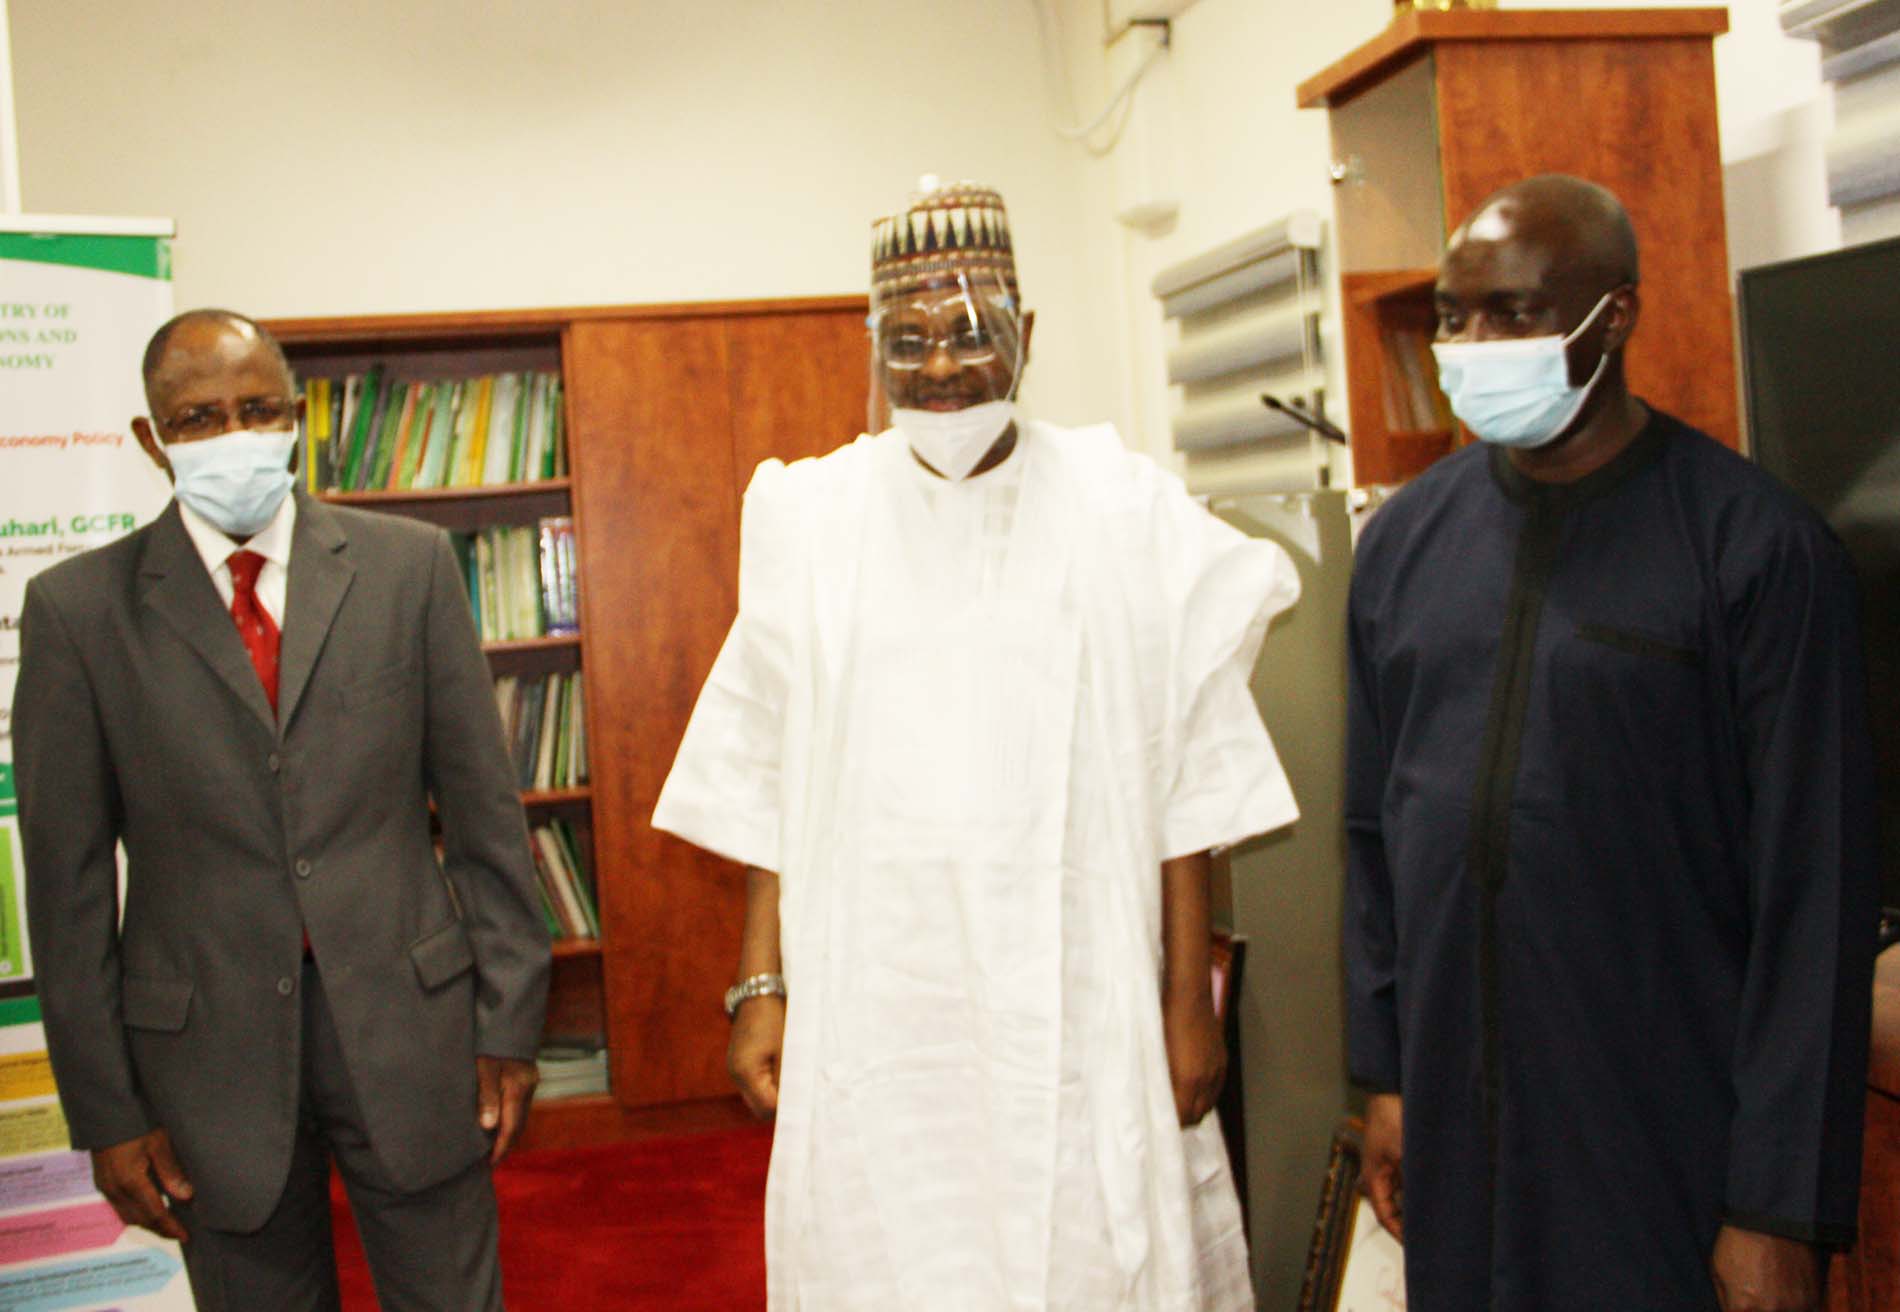 L-R,  Director General, Securities and Exchange Commission Mr. Lamido Yuguda, Minister of Communications and Digital Economy Mr Ali > Pantami and Assistant Director, SEC Mr Bagudu Waziri during a Meeting > between SEC and > Minister of Communications and Digital Economy in Abuja > yesterday